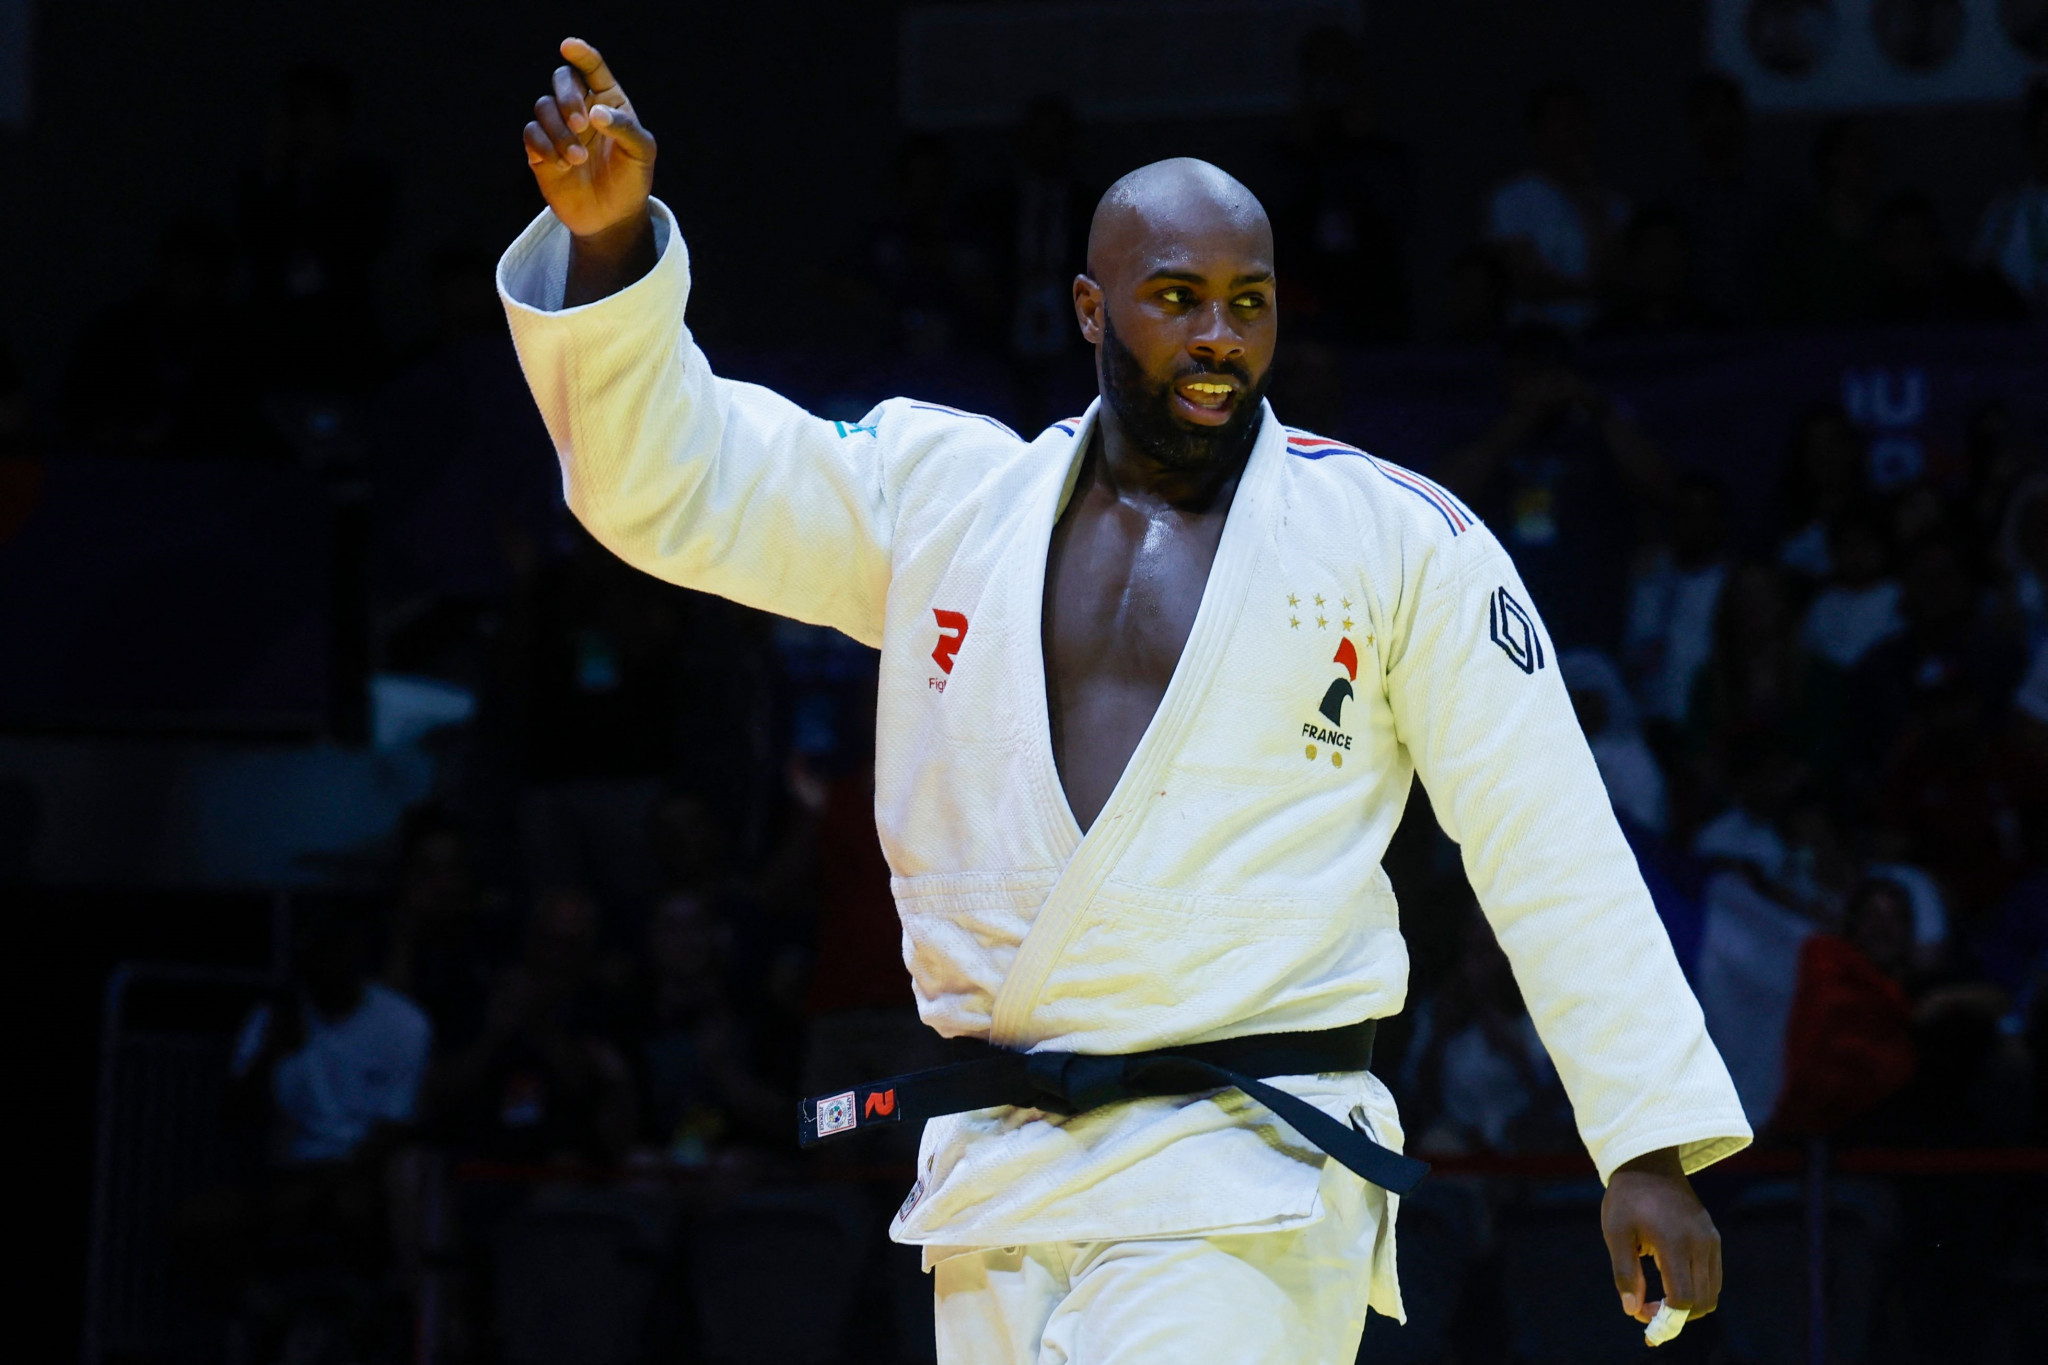 French judo legend Teddy Riner came through several tough battles to emerge victorious on his return to the World Championships following a six-year hiatus ©Getty Images